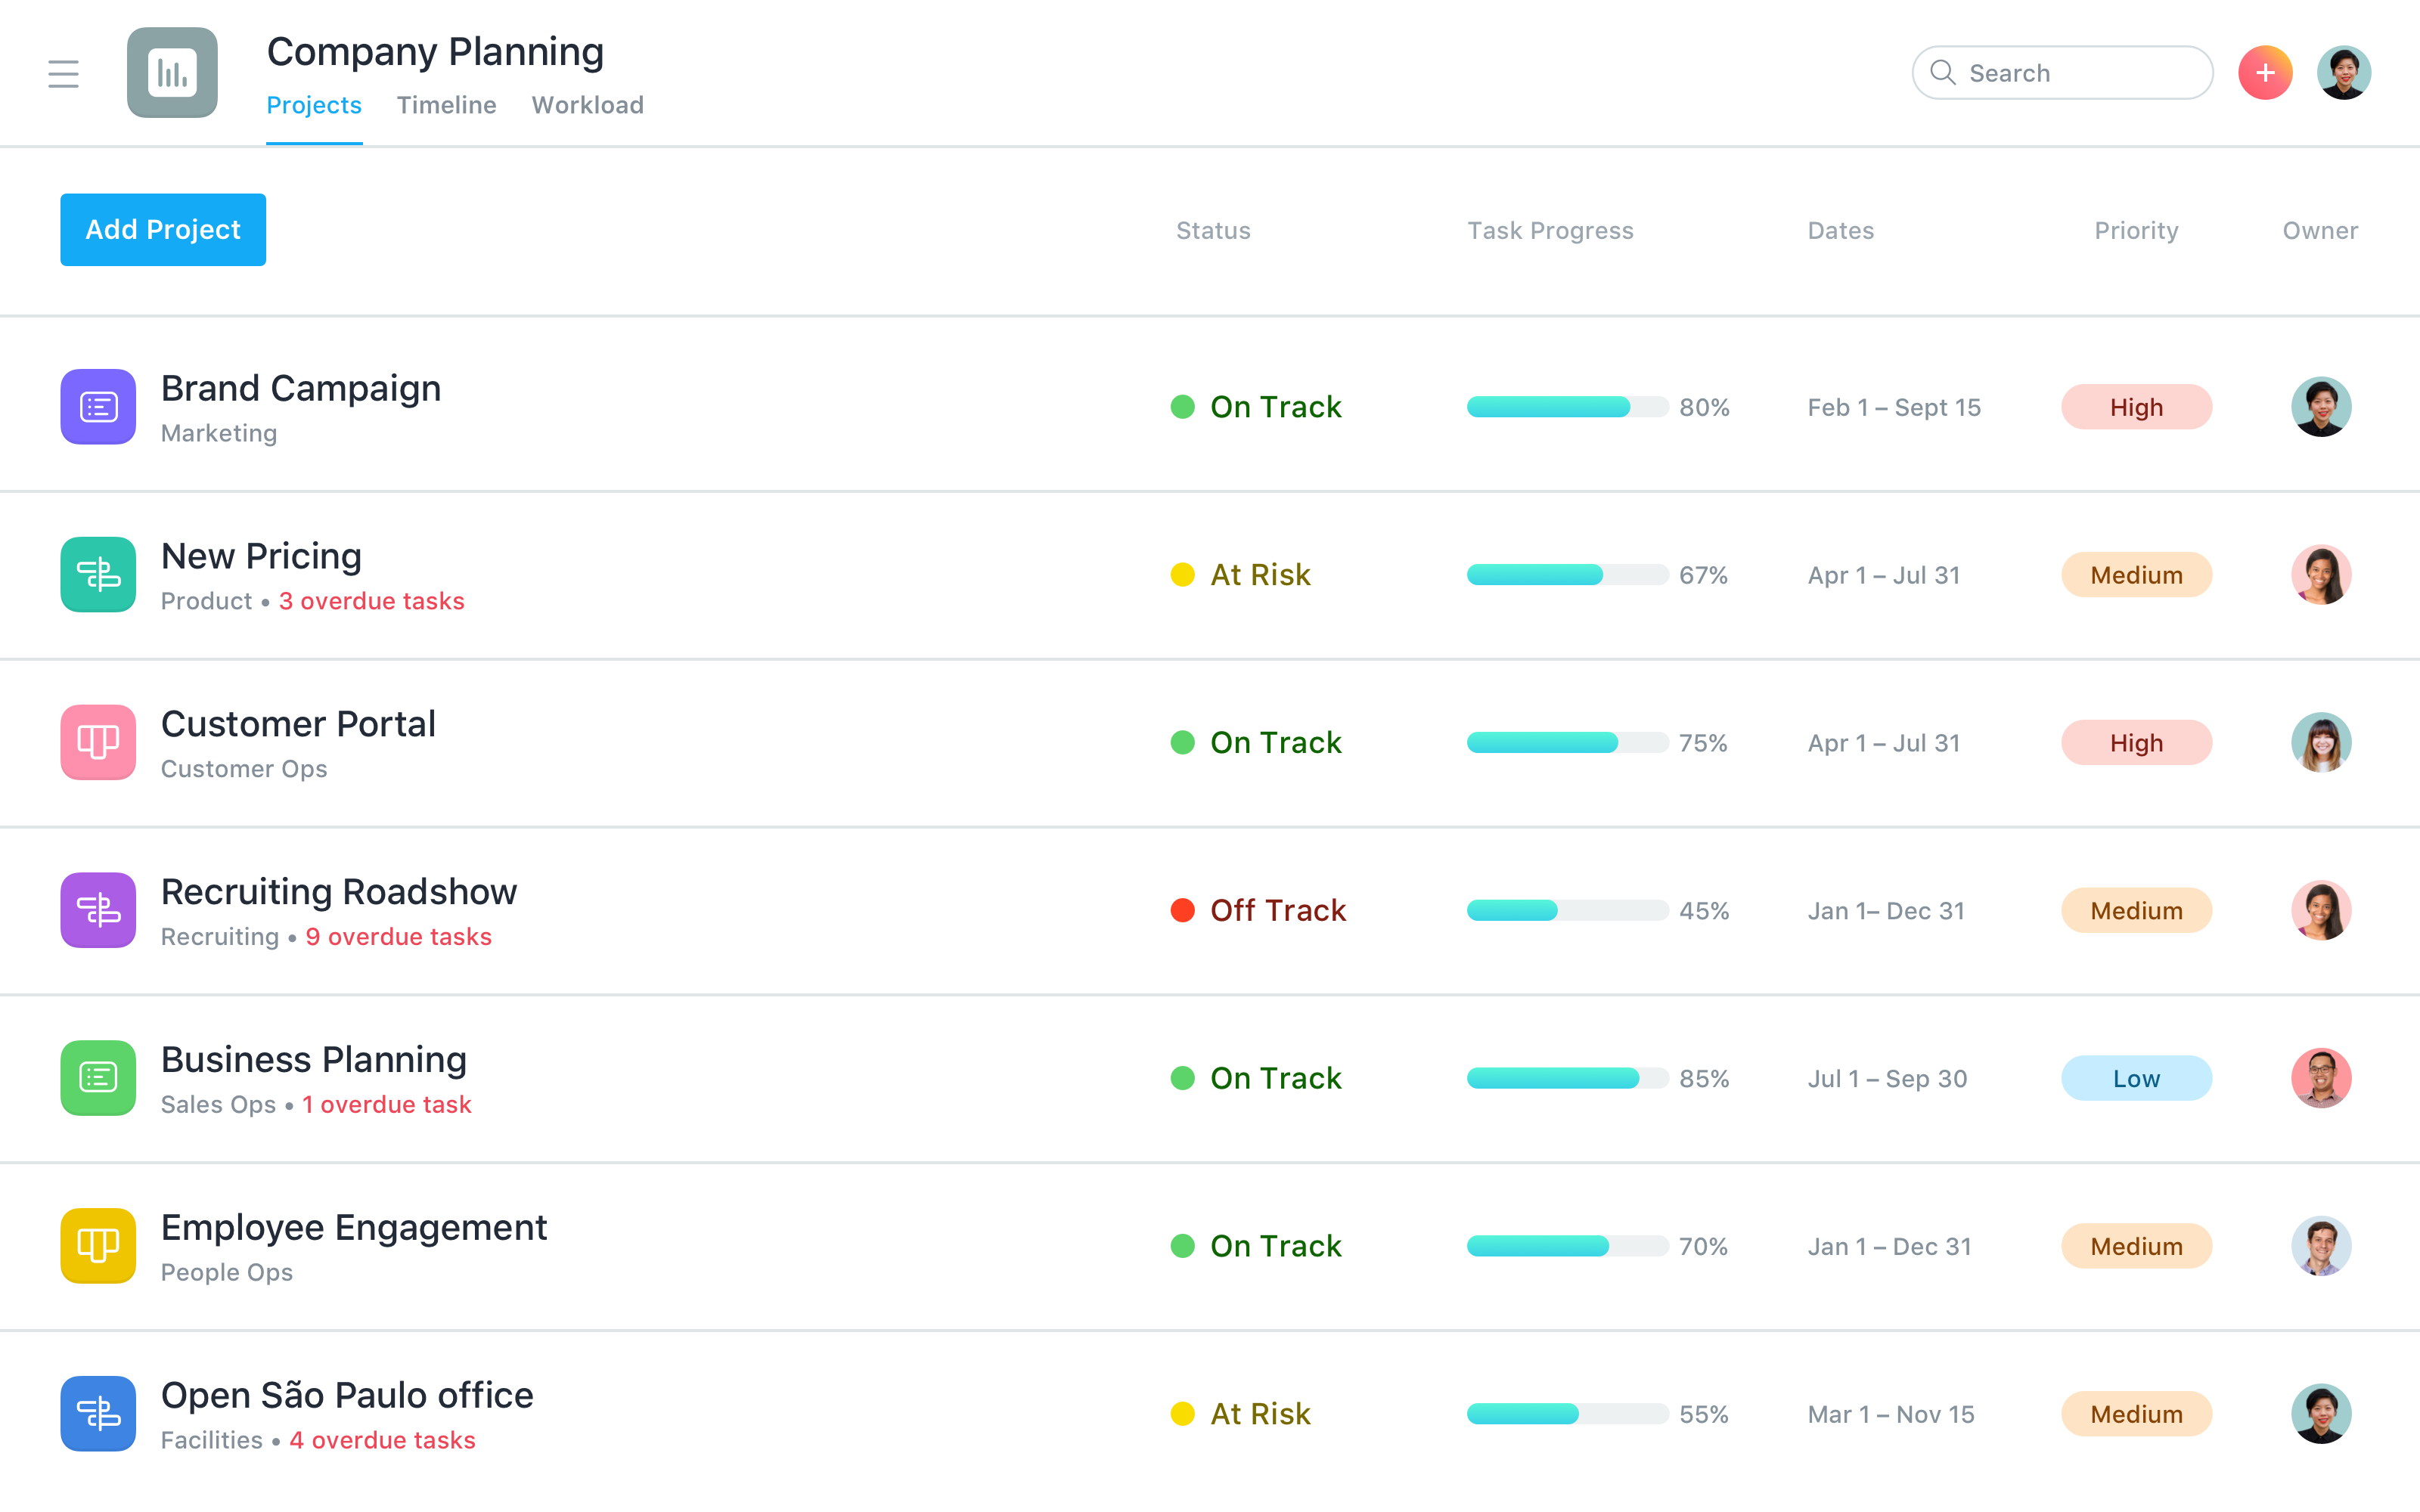 Asana Software - Track all your initiatives with project Portfolios. Portfolios show you the real-time status, priority, and progress of all your projects, so you have an accurate view of how you’re tracking toward your goals.